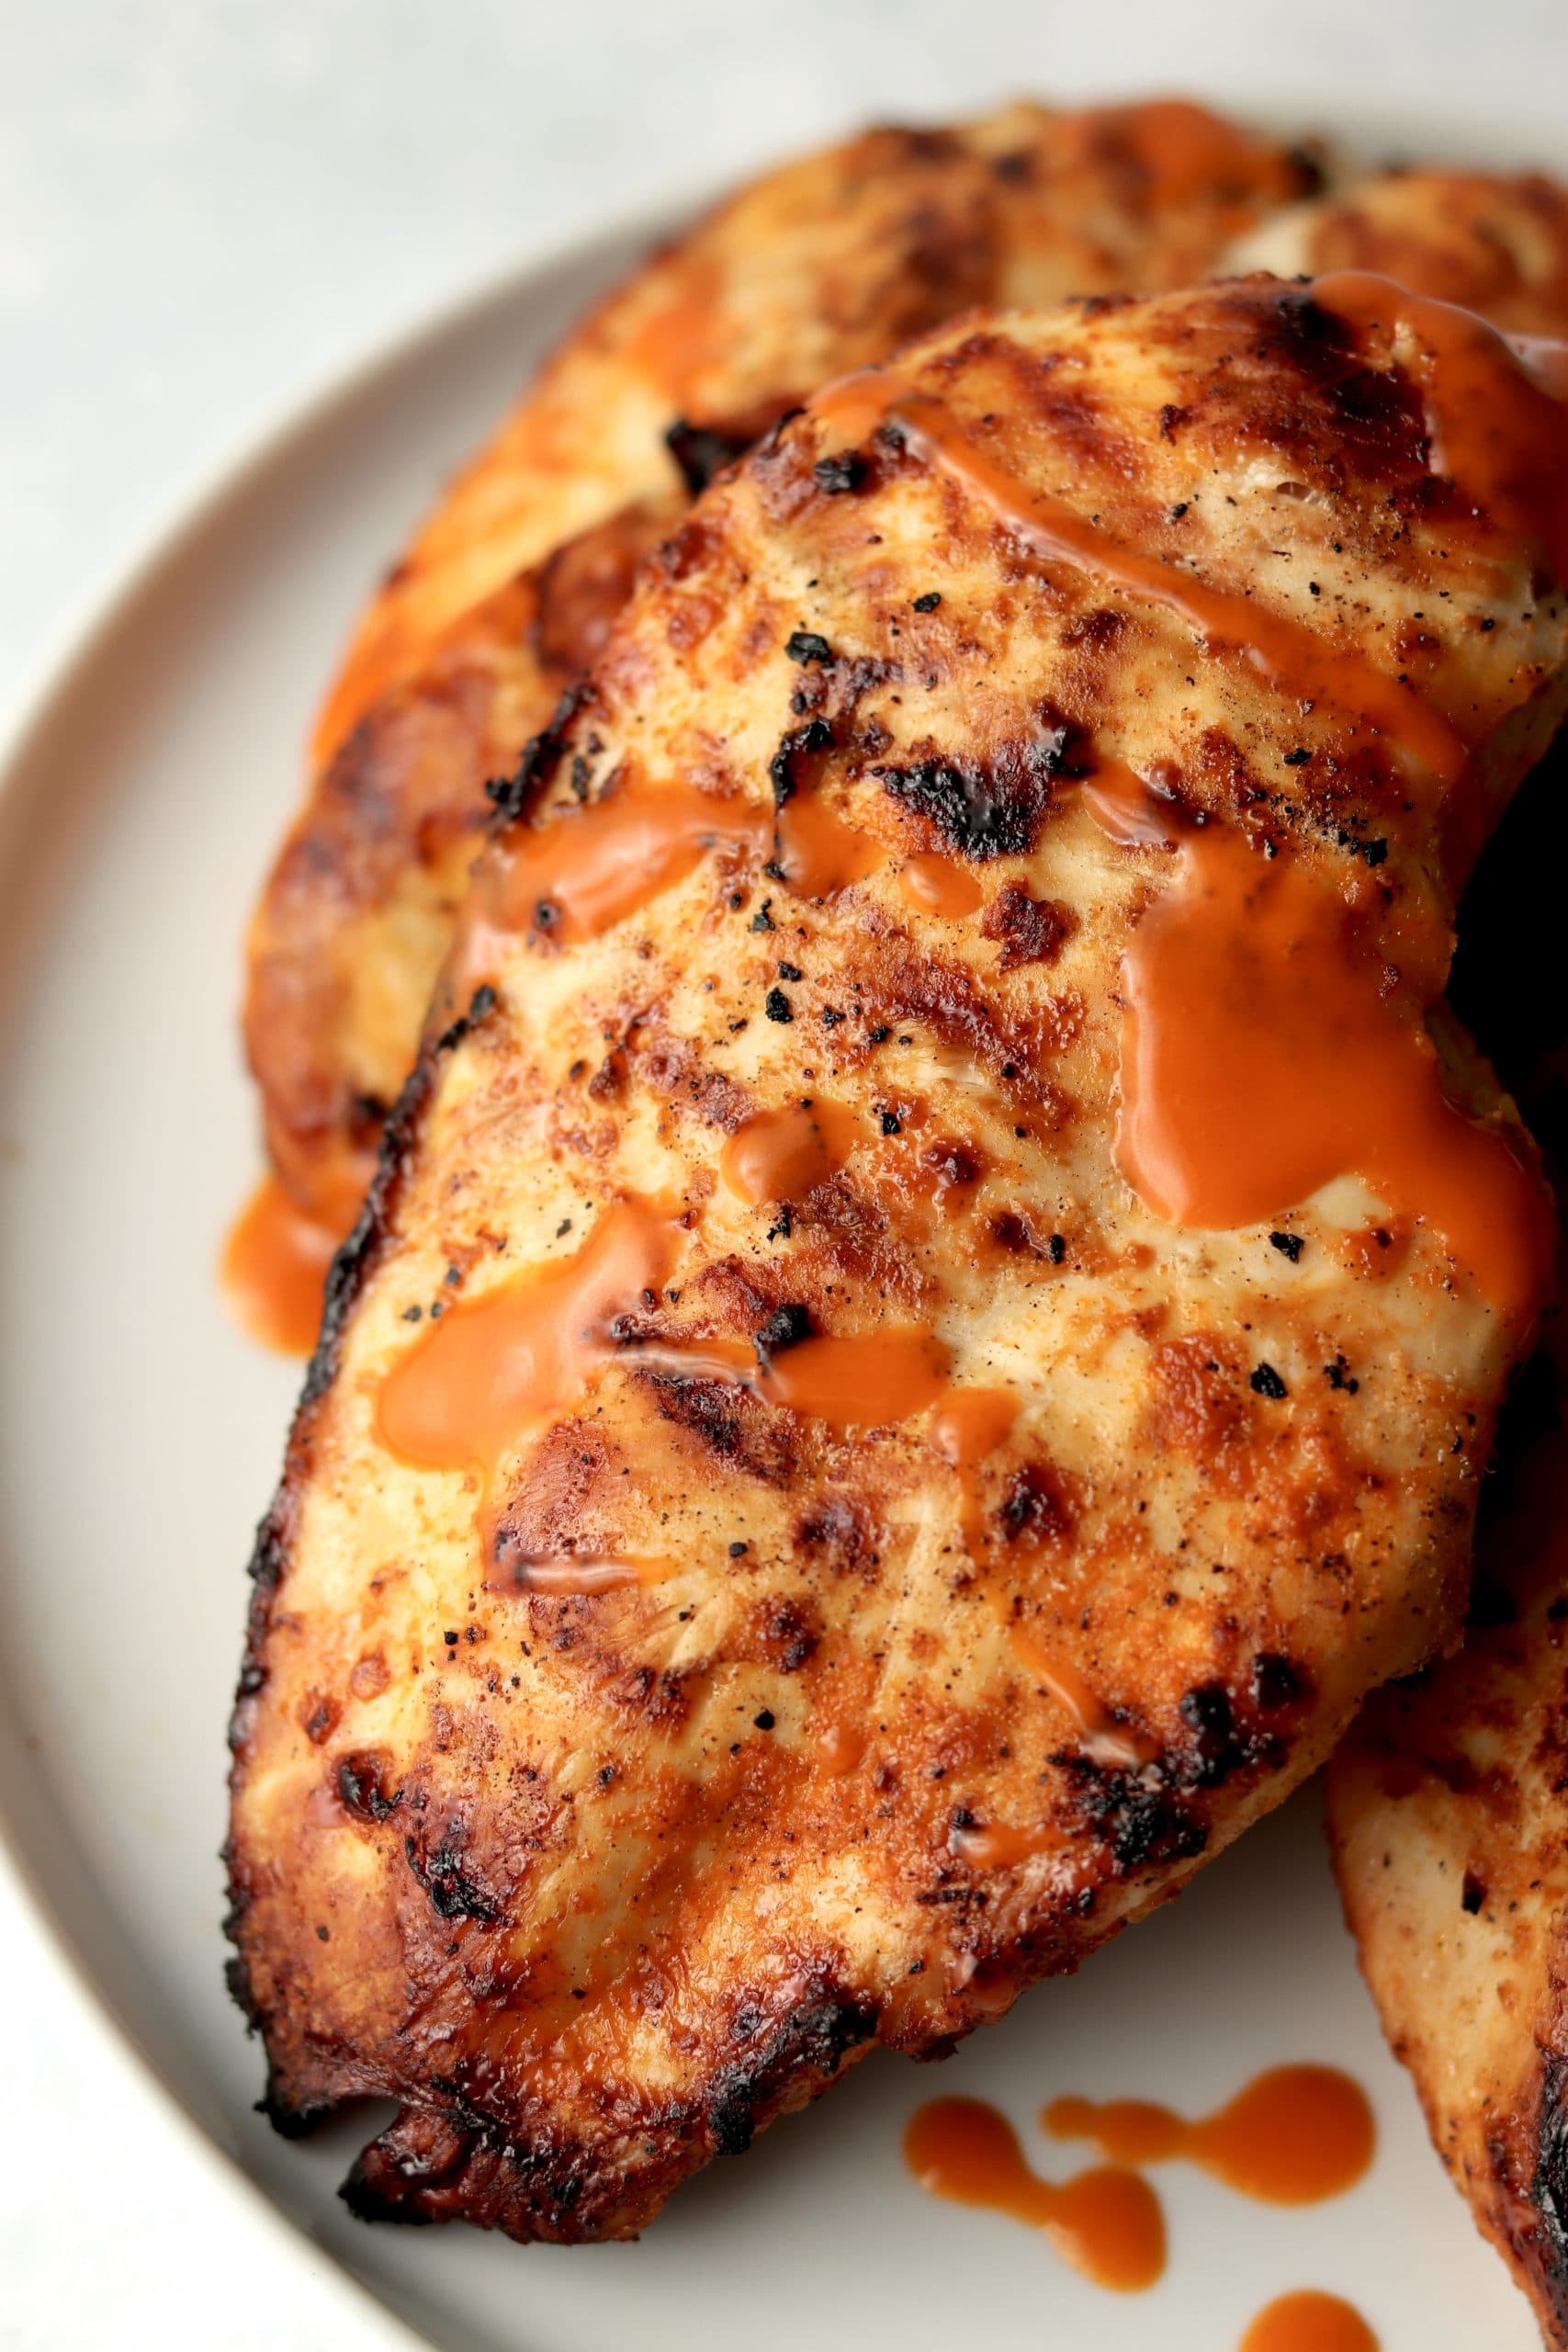 Grilled chicken breast with buffalo sauce